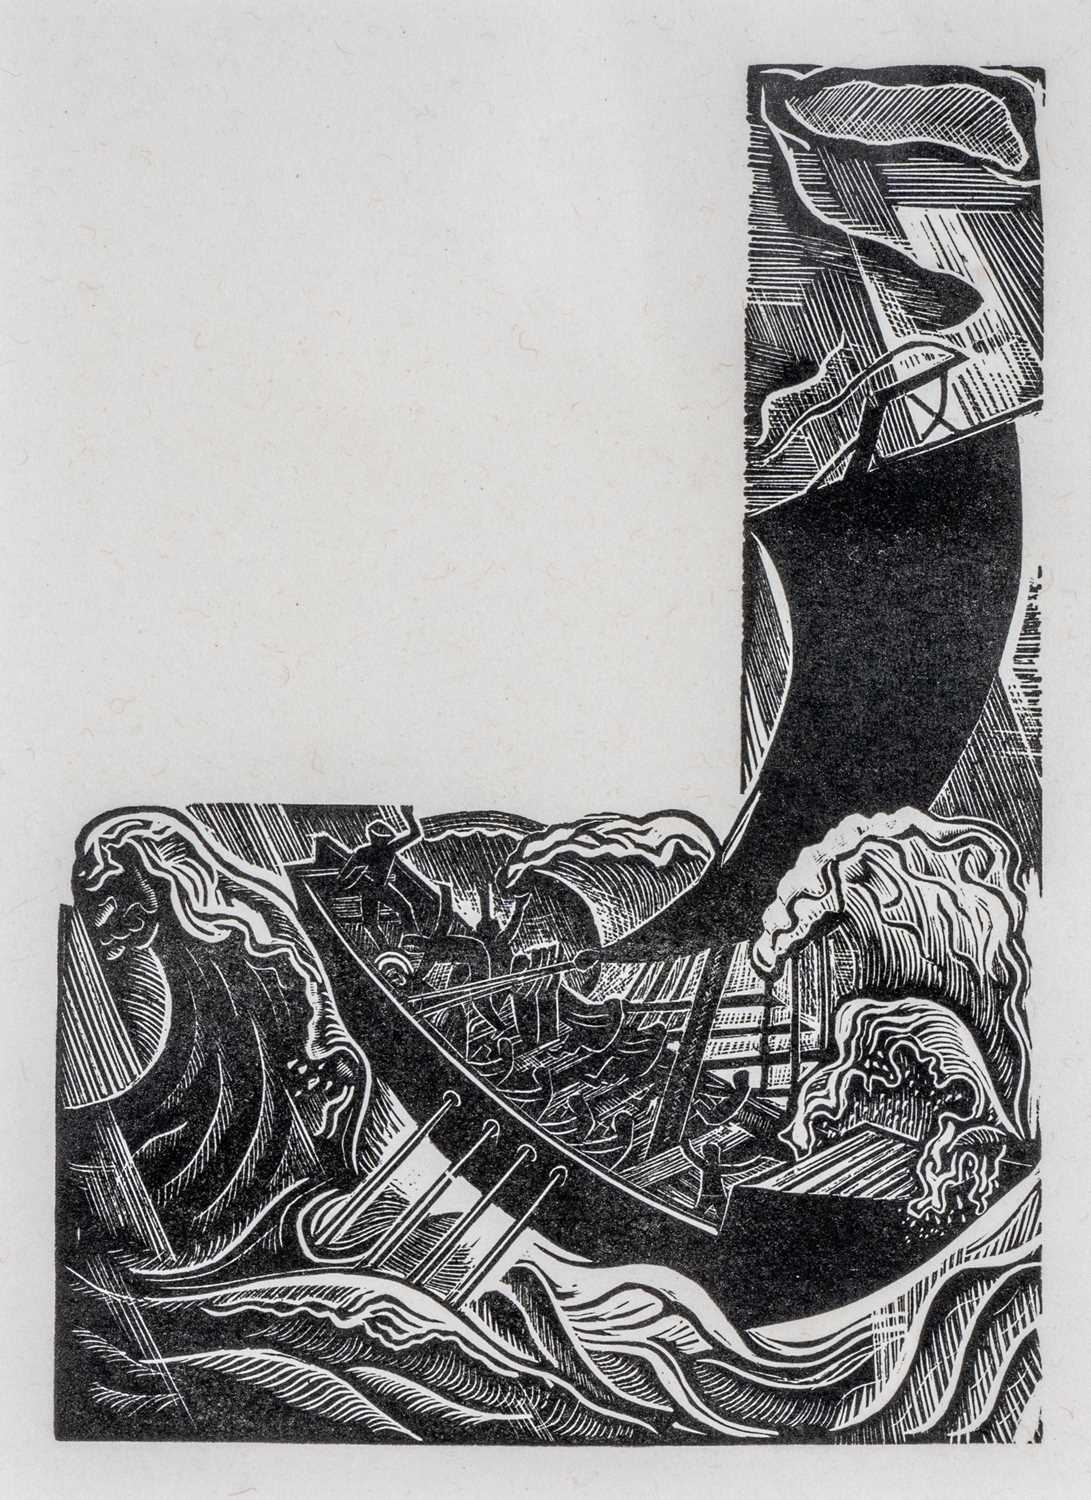 ‡ DAVID JONES 1926 limited edition (89/100) wood engraving (1979 reprint on japon paper) - entitled verso on Martin Tinney Gallery label 'The Tempest (from the Book of Jonah)' by David Jones, 1926